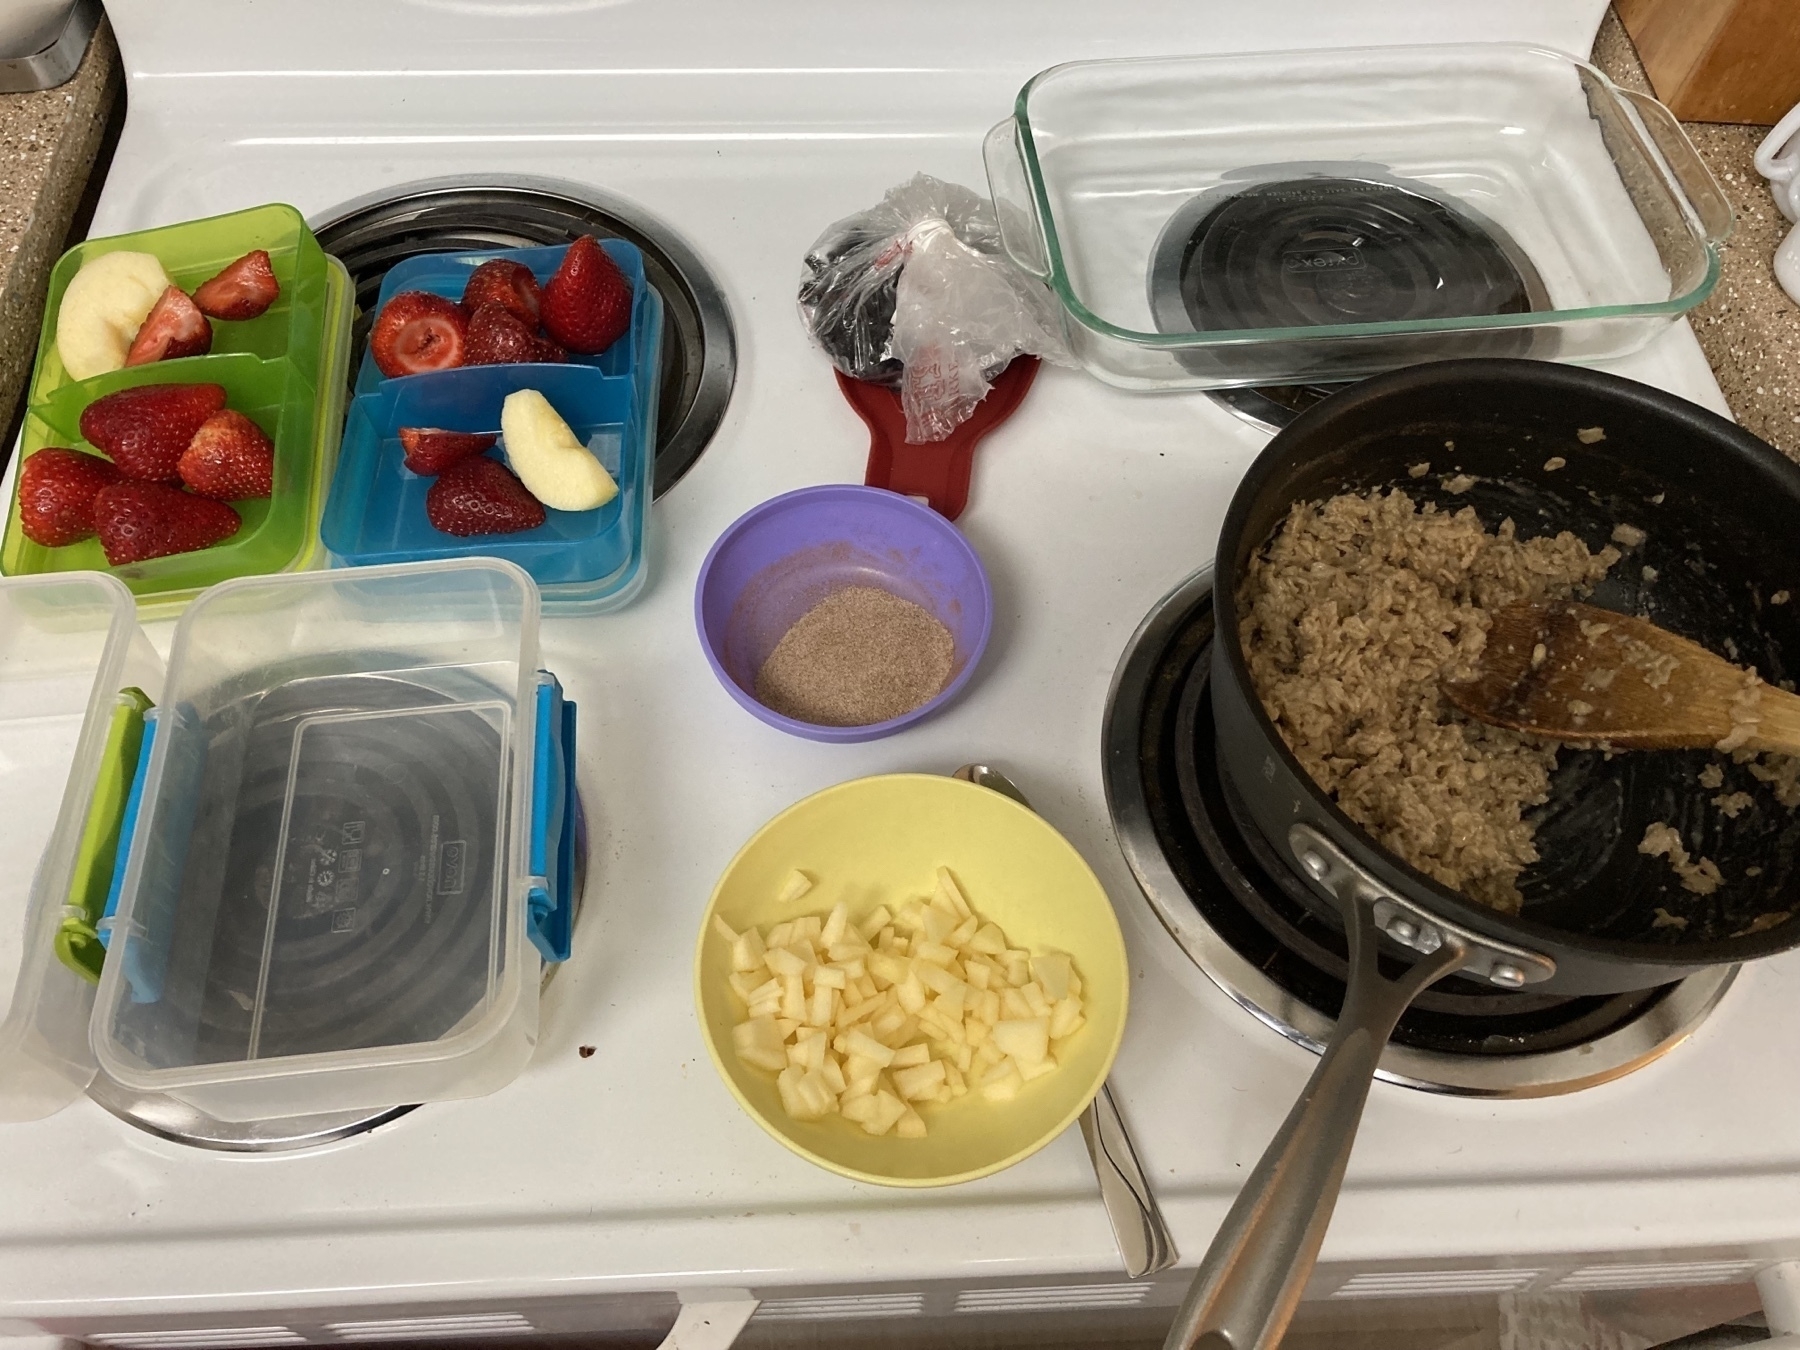 Stove with oatmeal and fruit on top. 